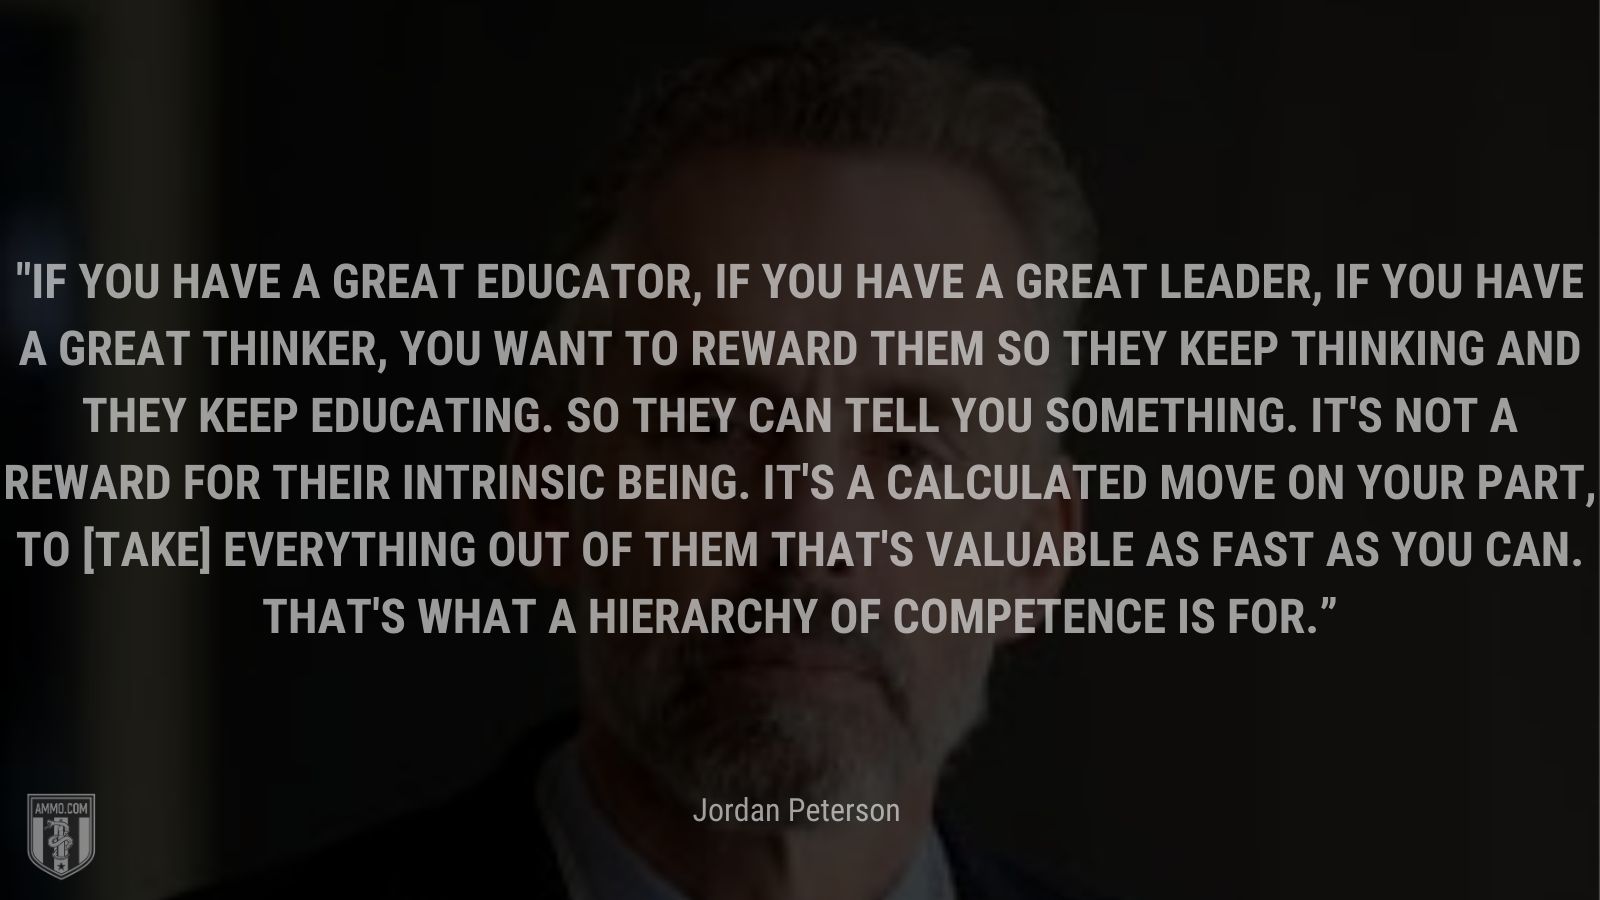 “If you have a great educator, if you have a great leader, if you have a great thinker, you want to reward them so they keep thinking and they keep educating. So they can tell you something. It's not a reward for their intrinsic being. It's a calculated move on your part, to [take] everything out of them that's valuable as fast as you can. That's what a hierarchy of competence is for.” - Jordan Peterson